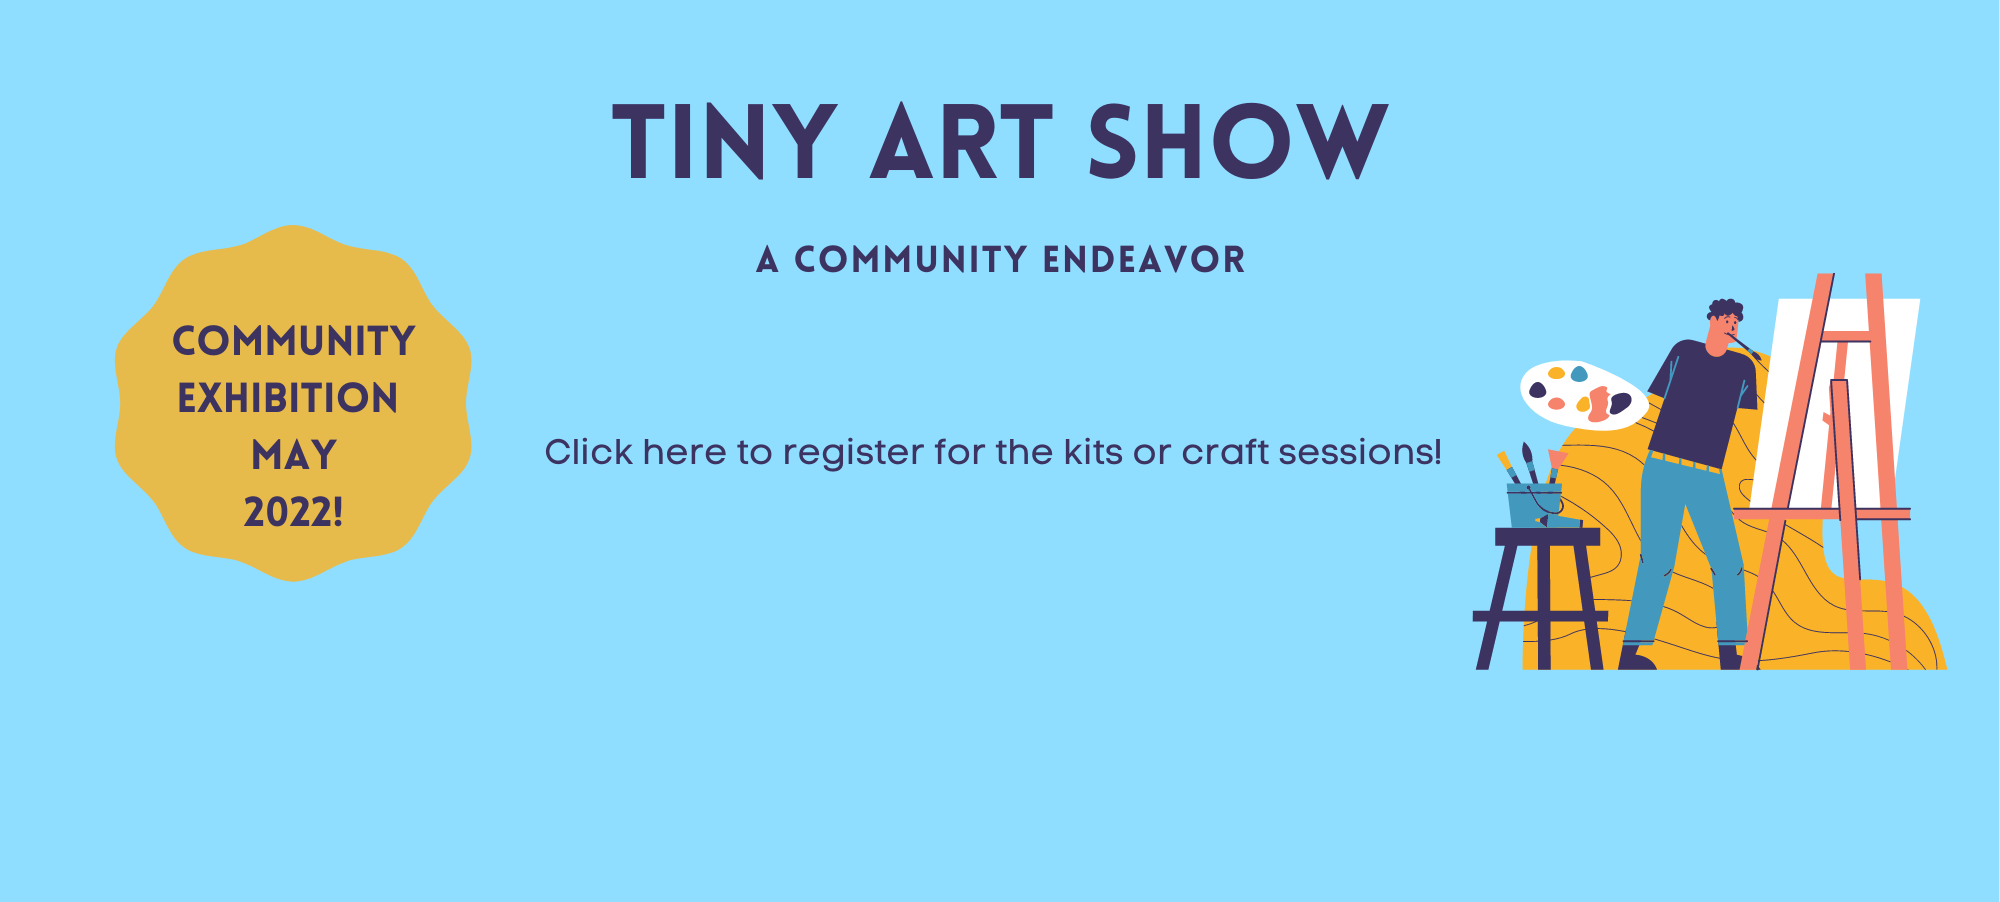 Tiny Art Show 10.2 4.6 in